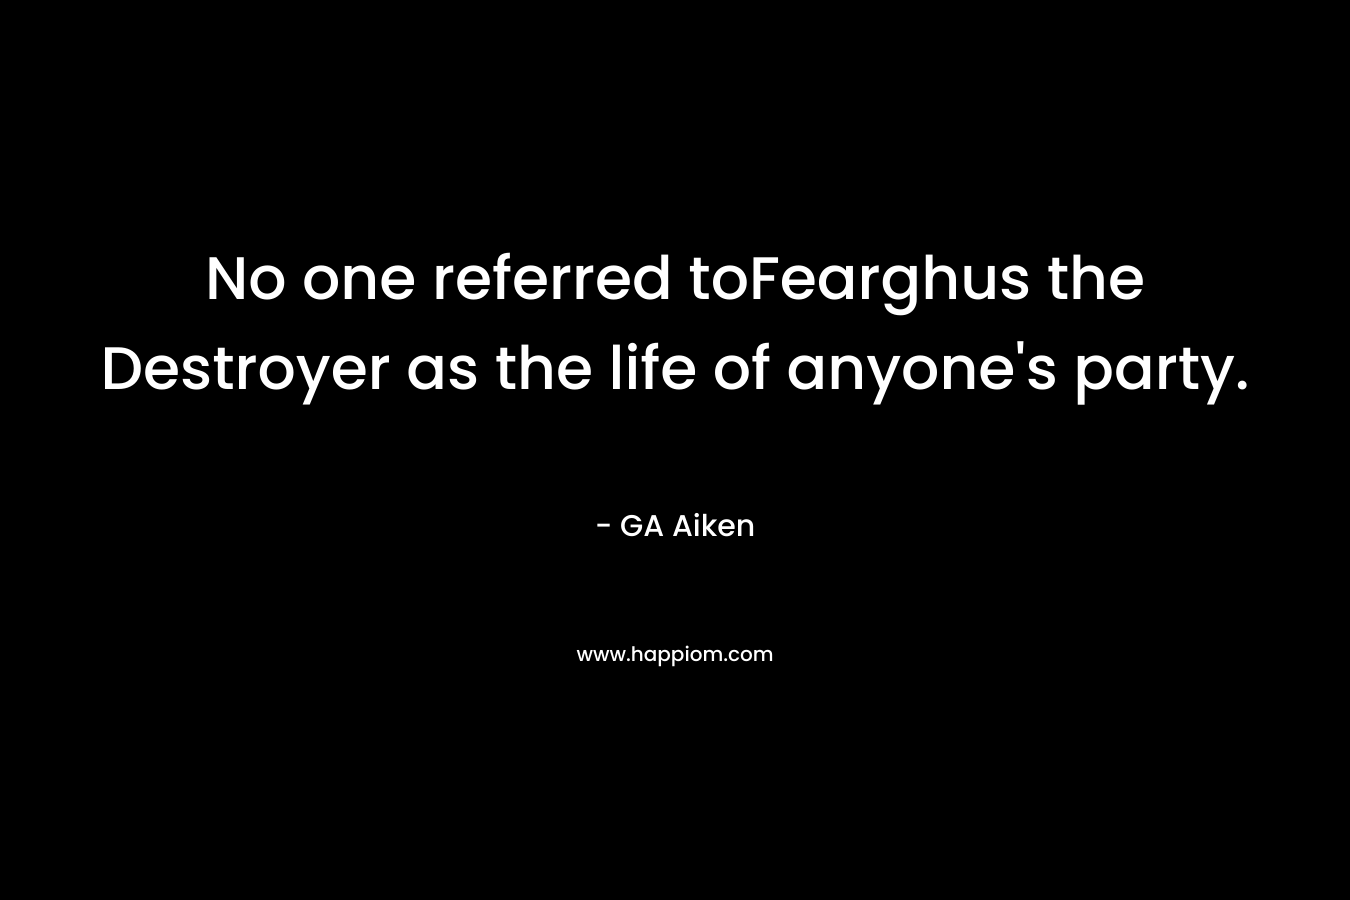 No one referred toFearghus the Destroyer as the life of anyone’s party. – GA Aiken